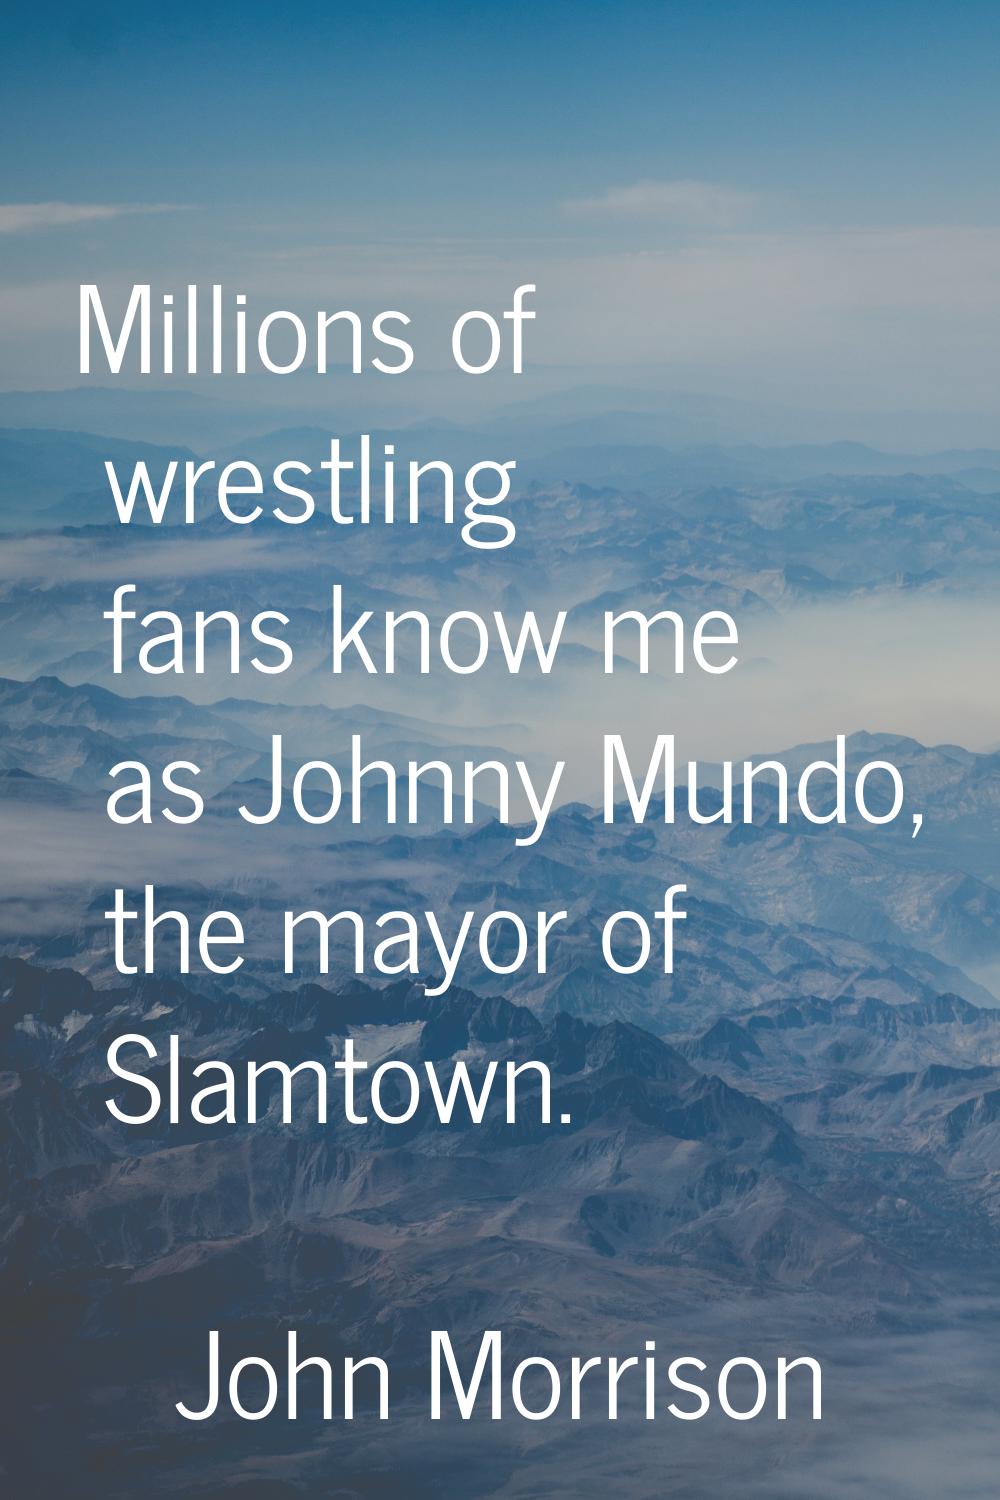 Millions of wrestling fans know me as Johnny Mundo, the mayor of Slamtown.